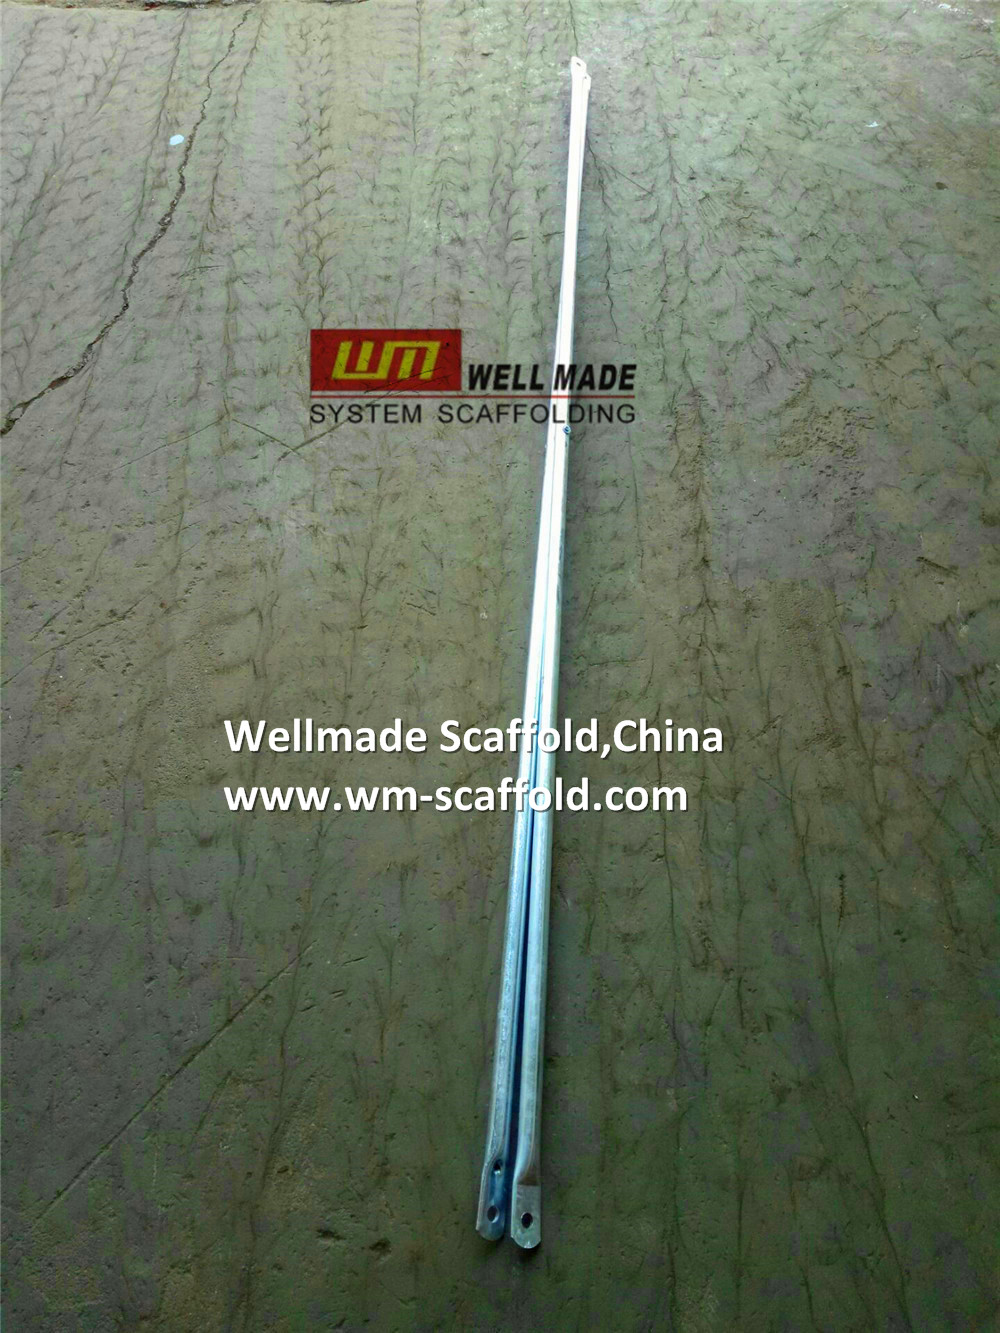 Frame Scaffolding Cross Brace for Building Construction Steel Frame System X Brace Components - Wellmade China